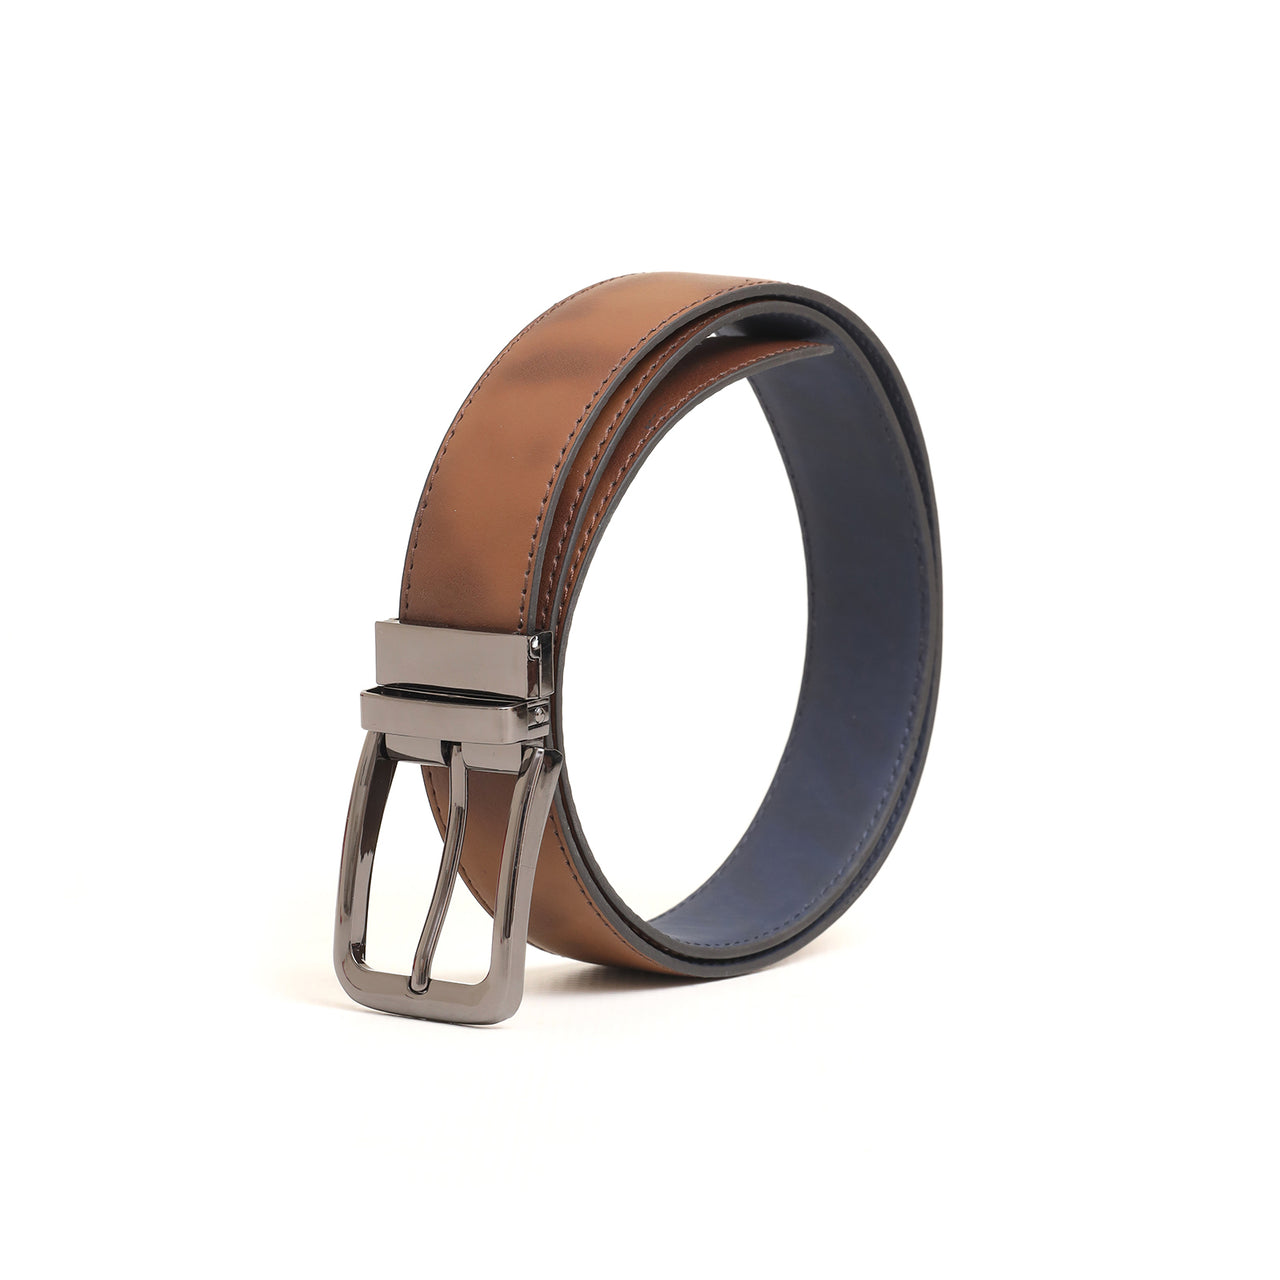 Buy High Quality Leather Belts For Men Online In Pakistan | Servis